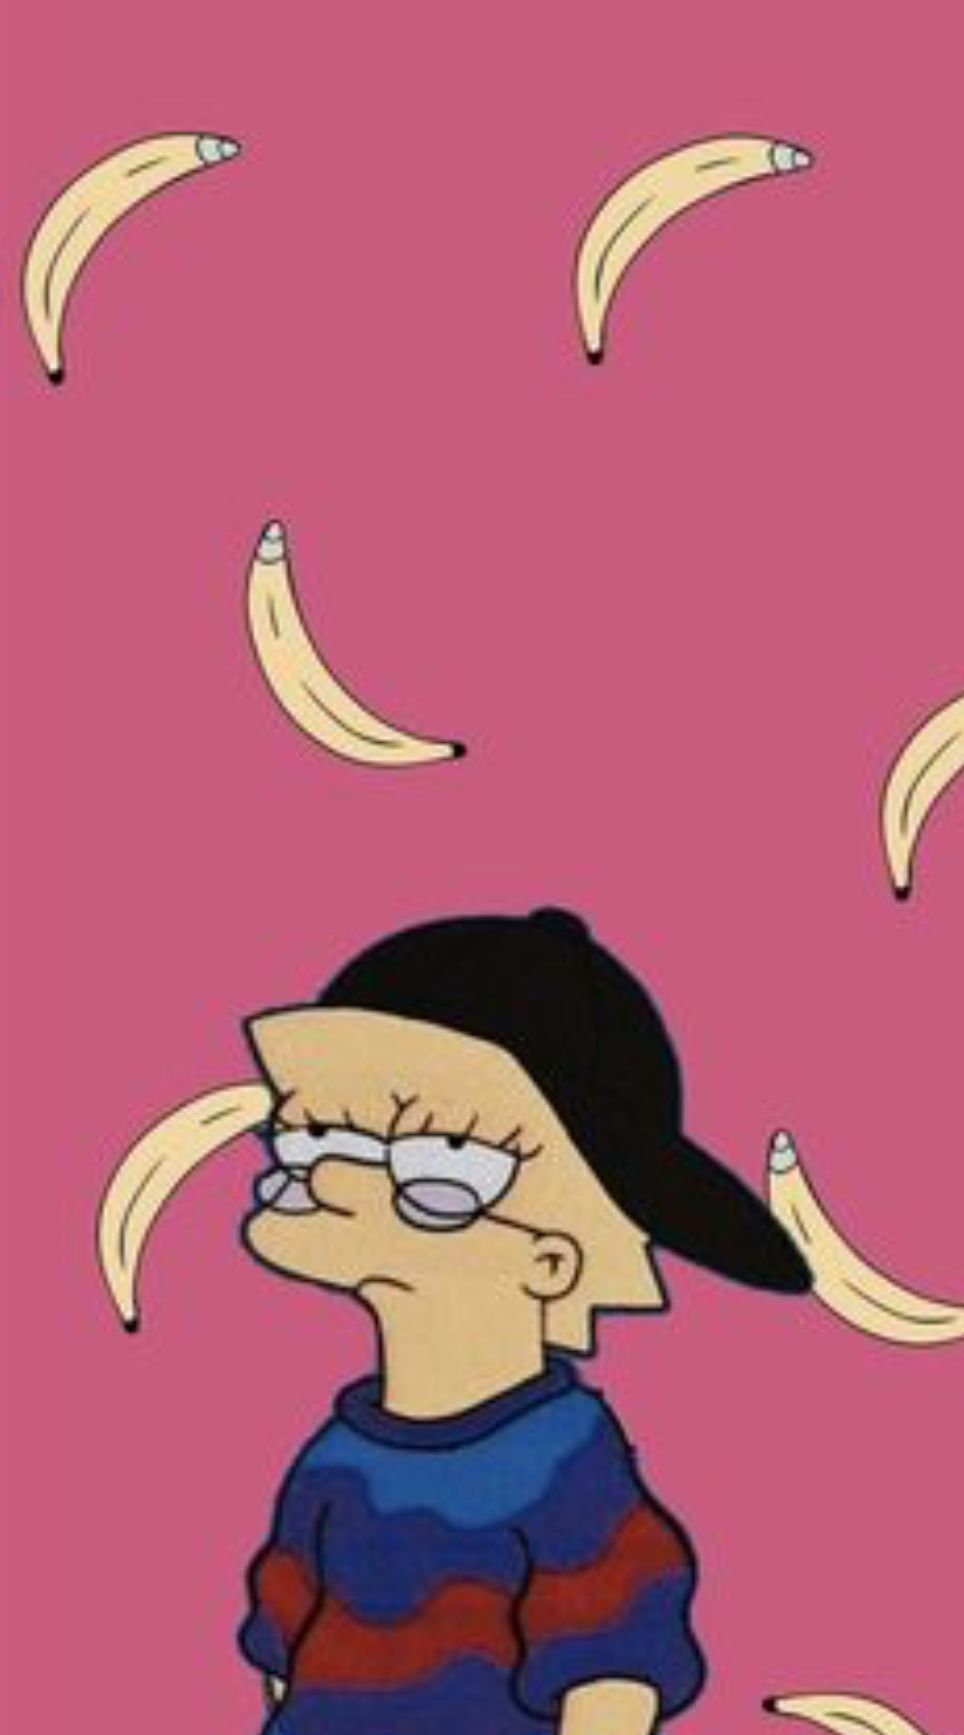 A cartoon character with bananas in the background - The Simpsons, Lisa Simpson